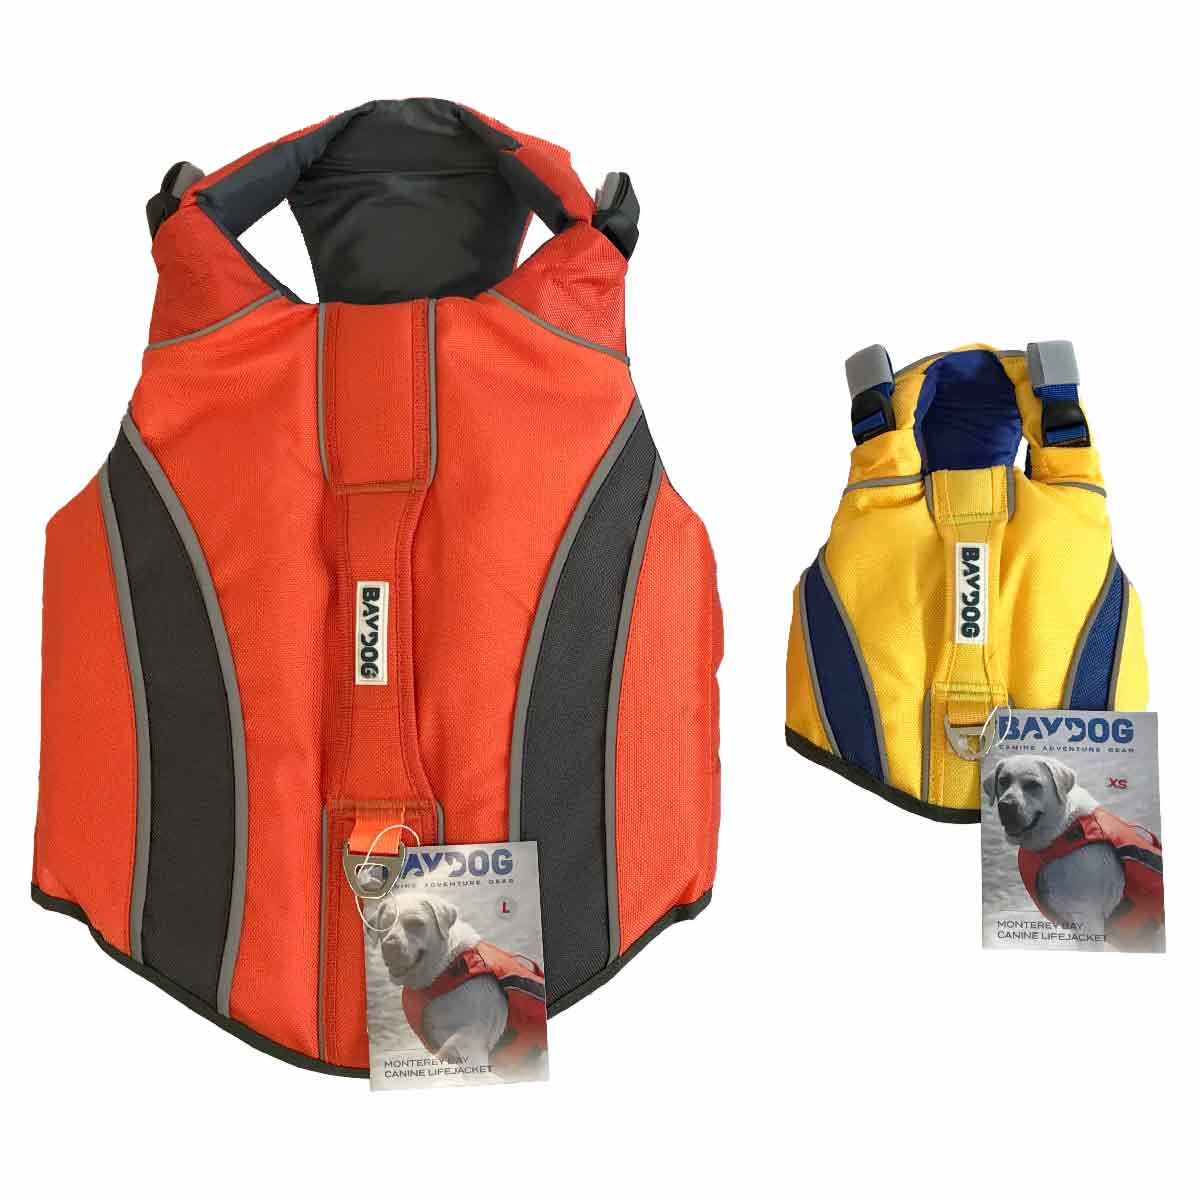 BAYDOG Monterey Bay flotation vest for dogs in blaze orange and nautical yellow front view